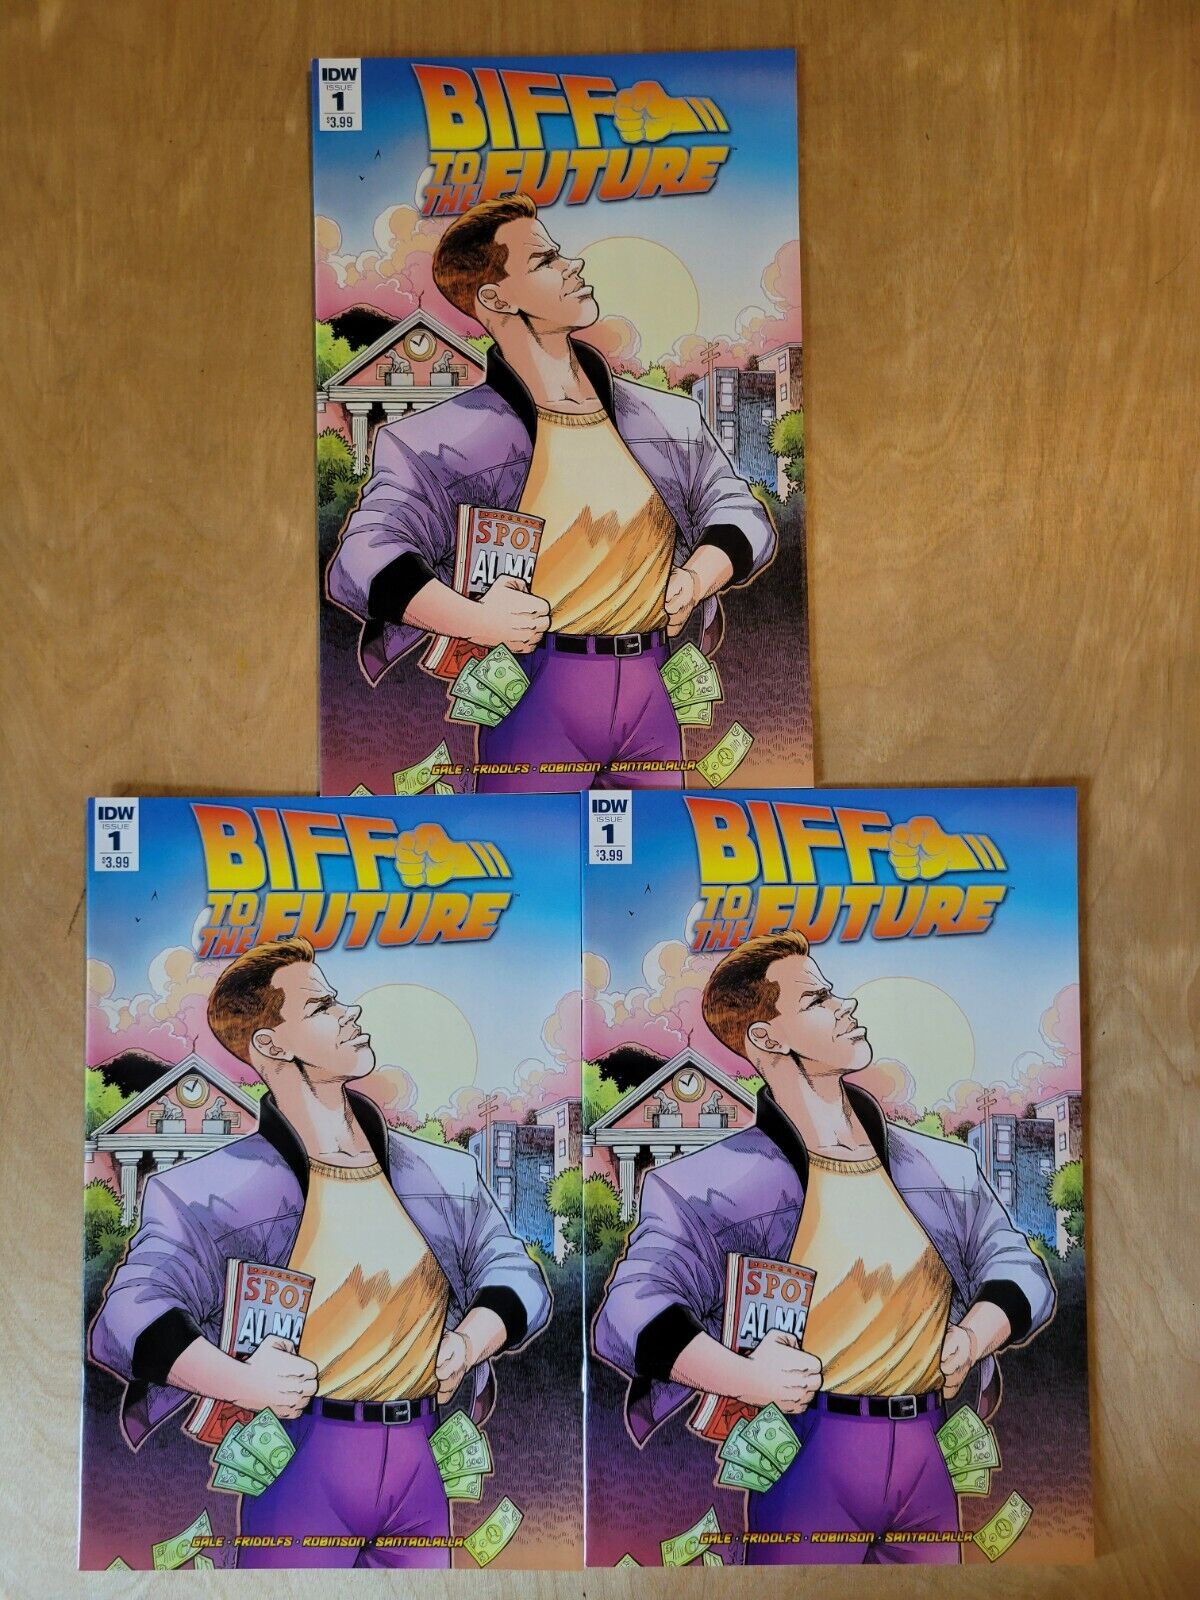 Lot of 3 Back To The Future: BIFF To The Future #1 IDW Comics 2017 NM/VF+ x3